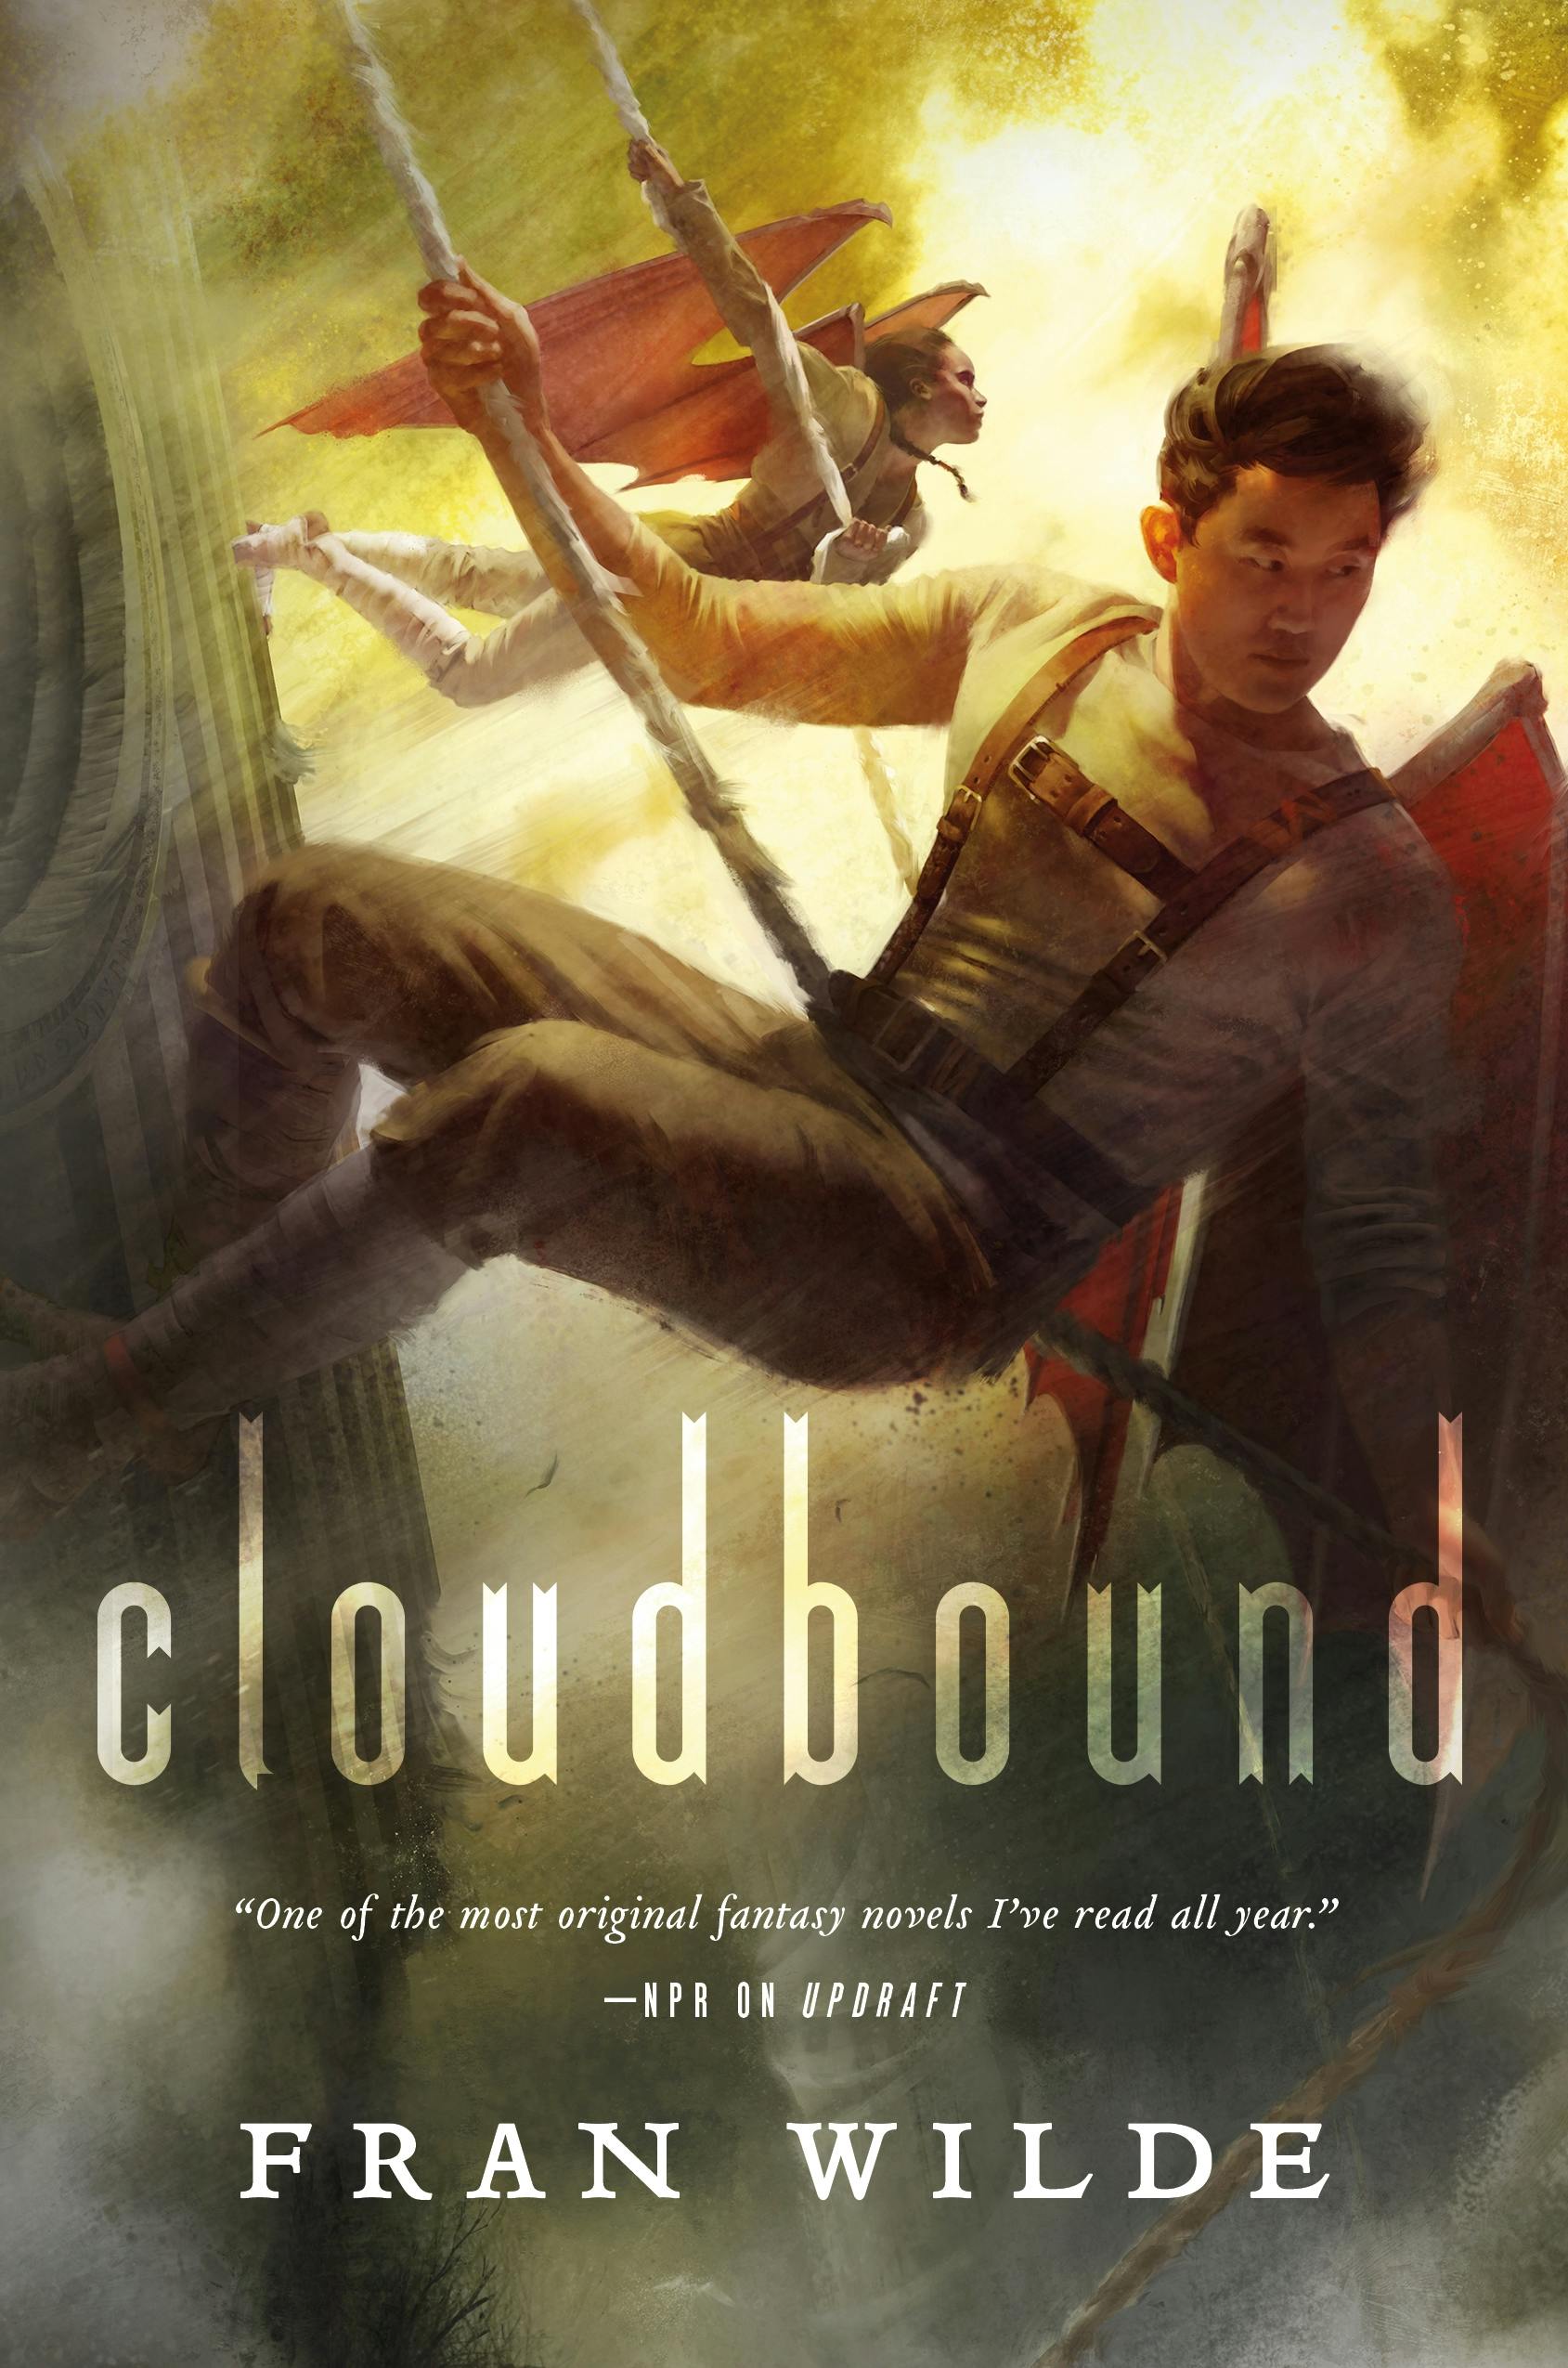 Cover for the book titled as: Cloudbound